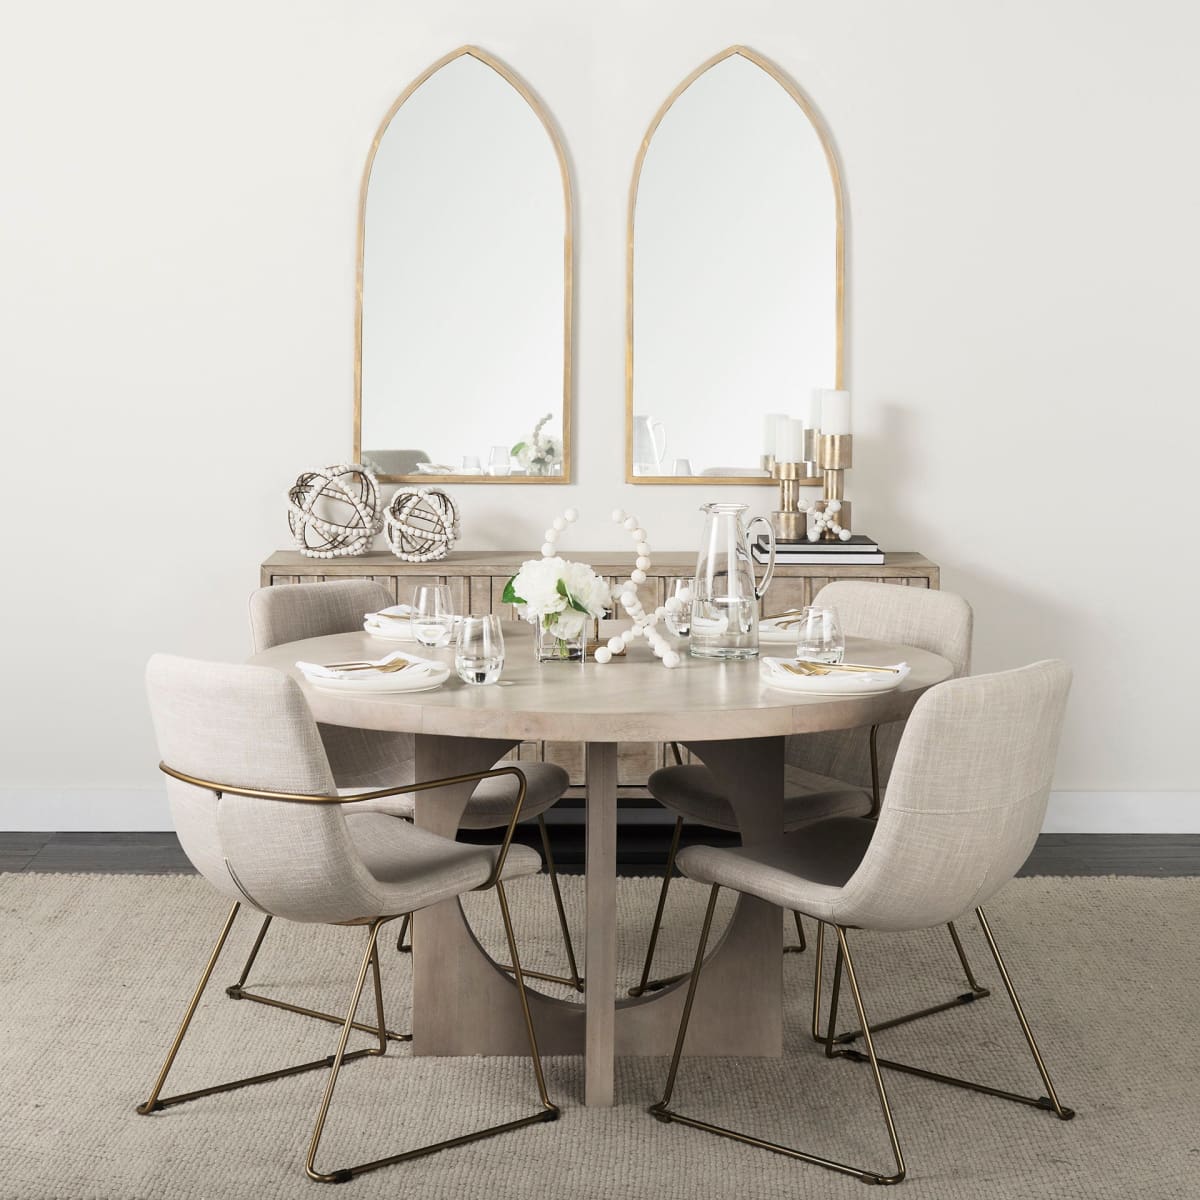 Giovanna Wall Mirror Gold Metal | Pointed Arch - wall-mirrors-grouped